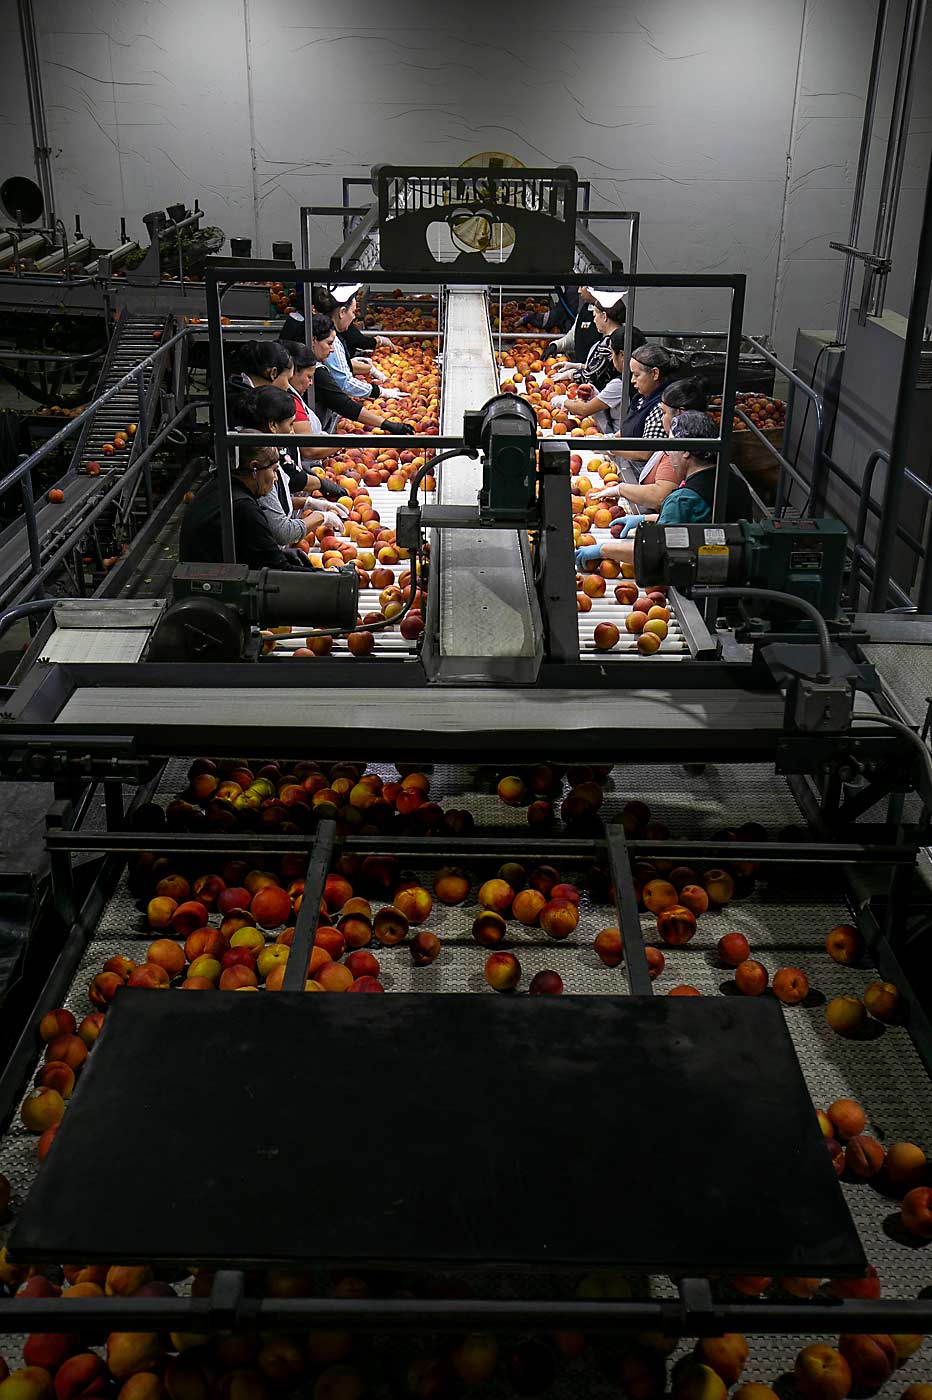 Experienced sorters grade organic peaches rolling into the packing line at Douglas Fruit in Pasco, Washington, in September. Next season, an optical sorter will take on that role, allowing the company to shift its staffing to run the stone fruit and apple lines at the same time, according to general manager Pete Douglas. (TJ Mullinax/Good Fruit Grower)